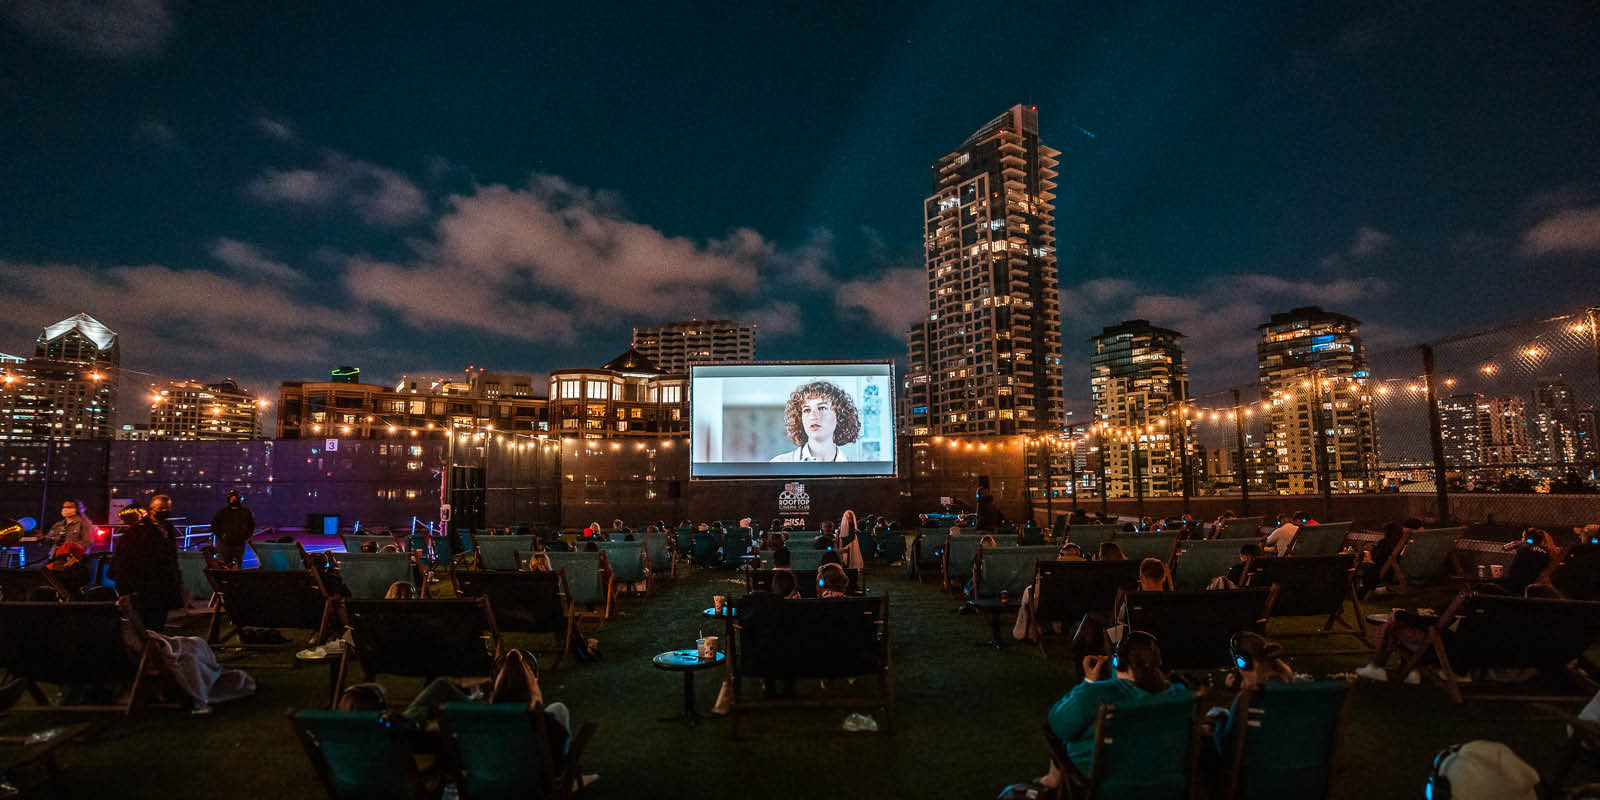 people sitting on lawn chairs at night watching a movie on screen